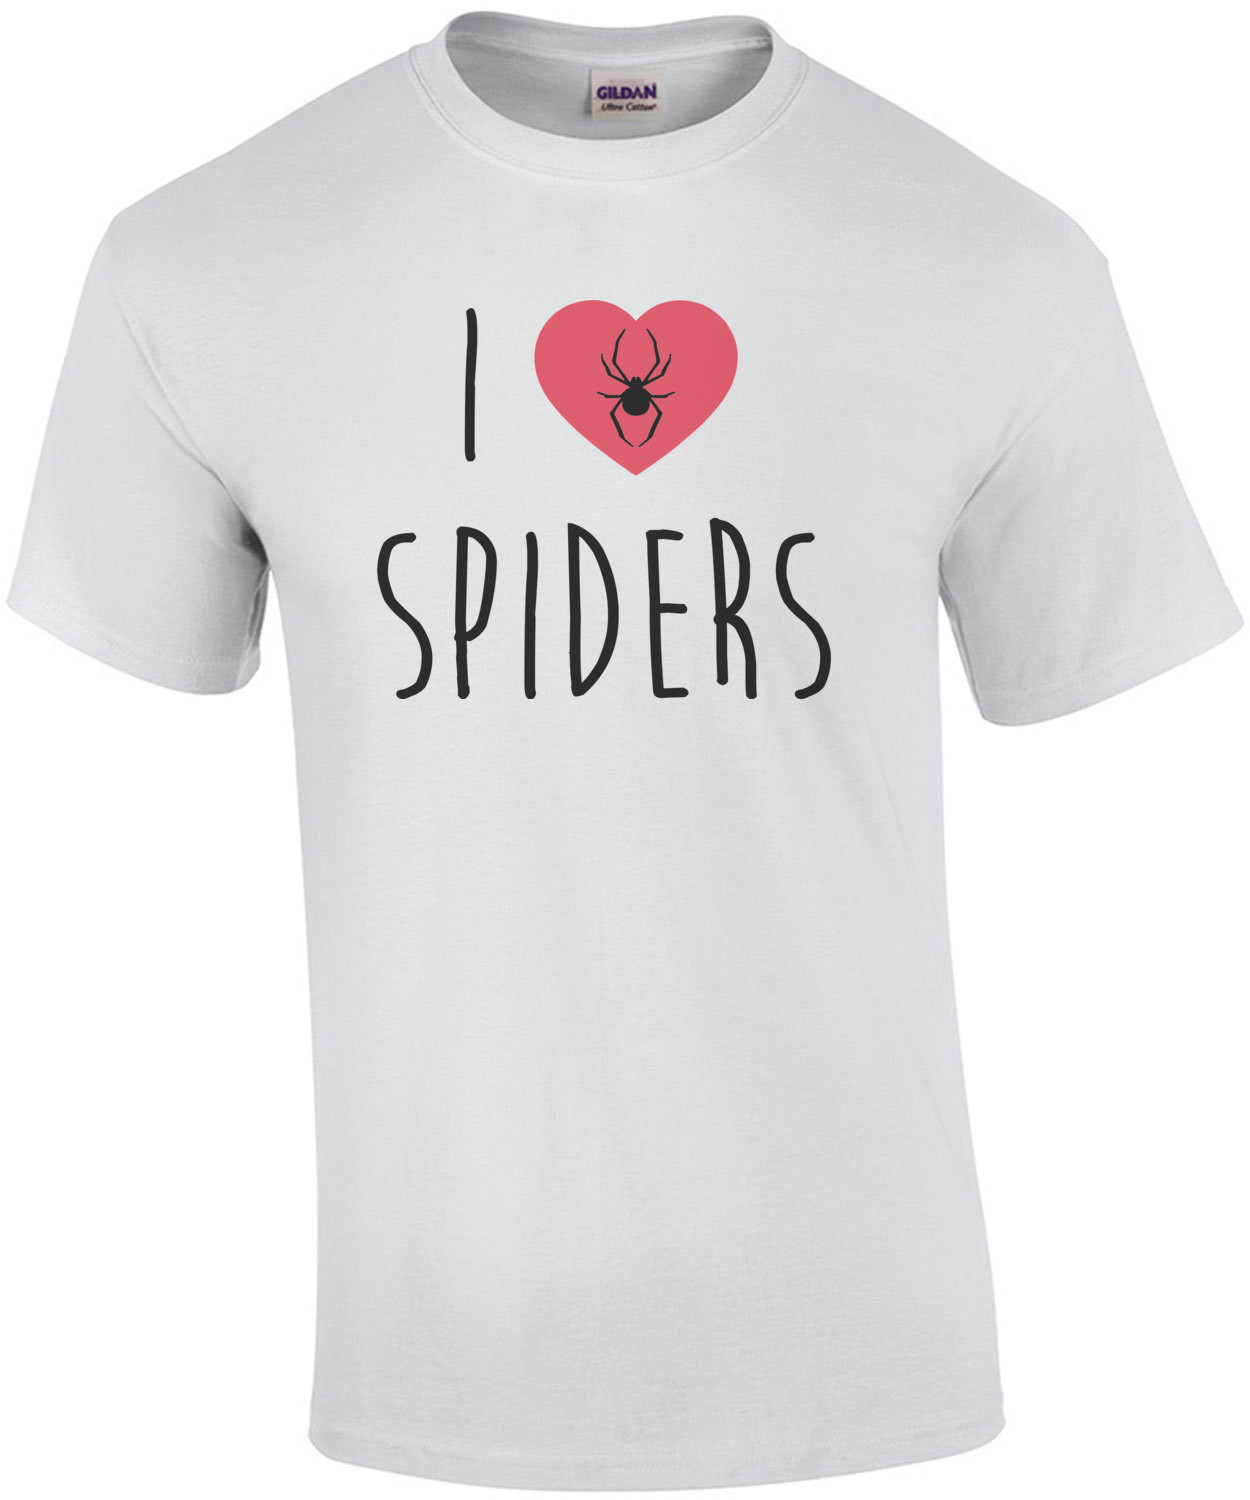 I Love Spiders - Spider T-Shirt